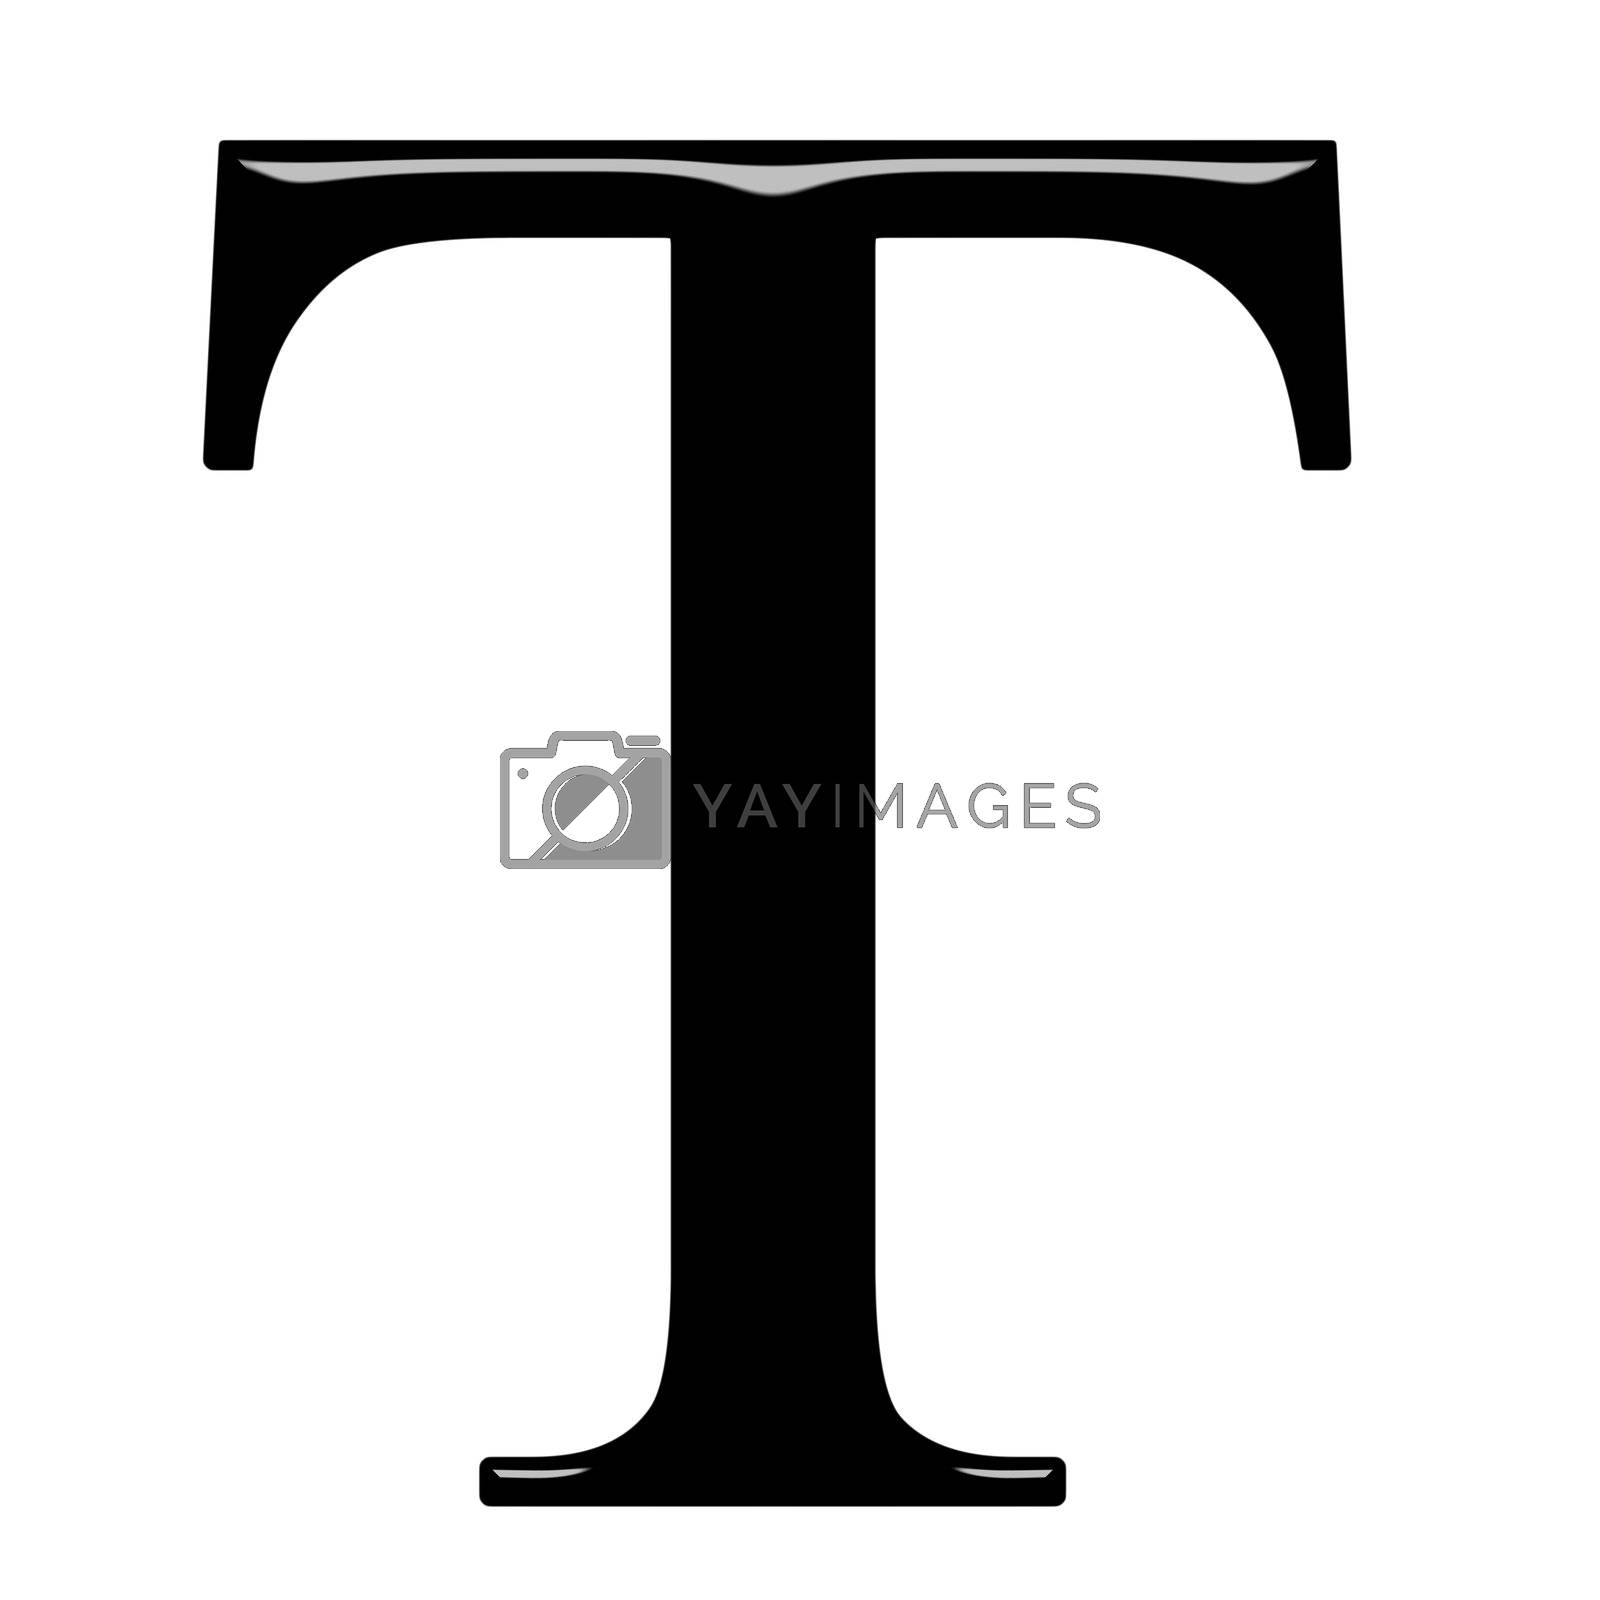 Royalty free image of 3D Greek Letter Tau by Georgios